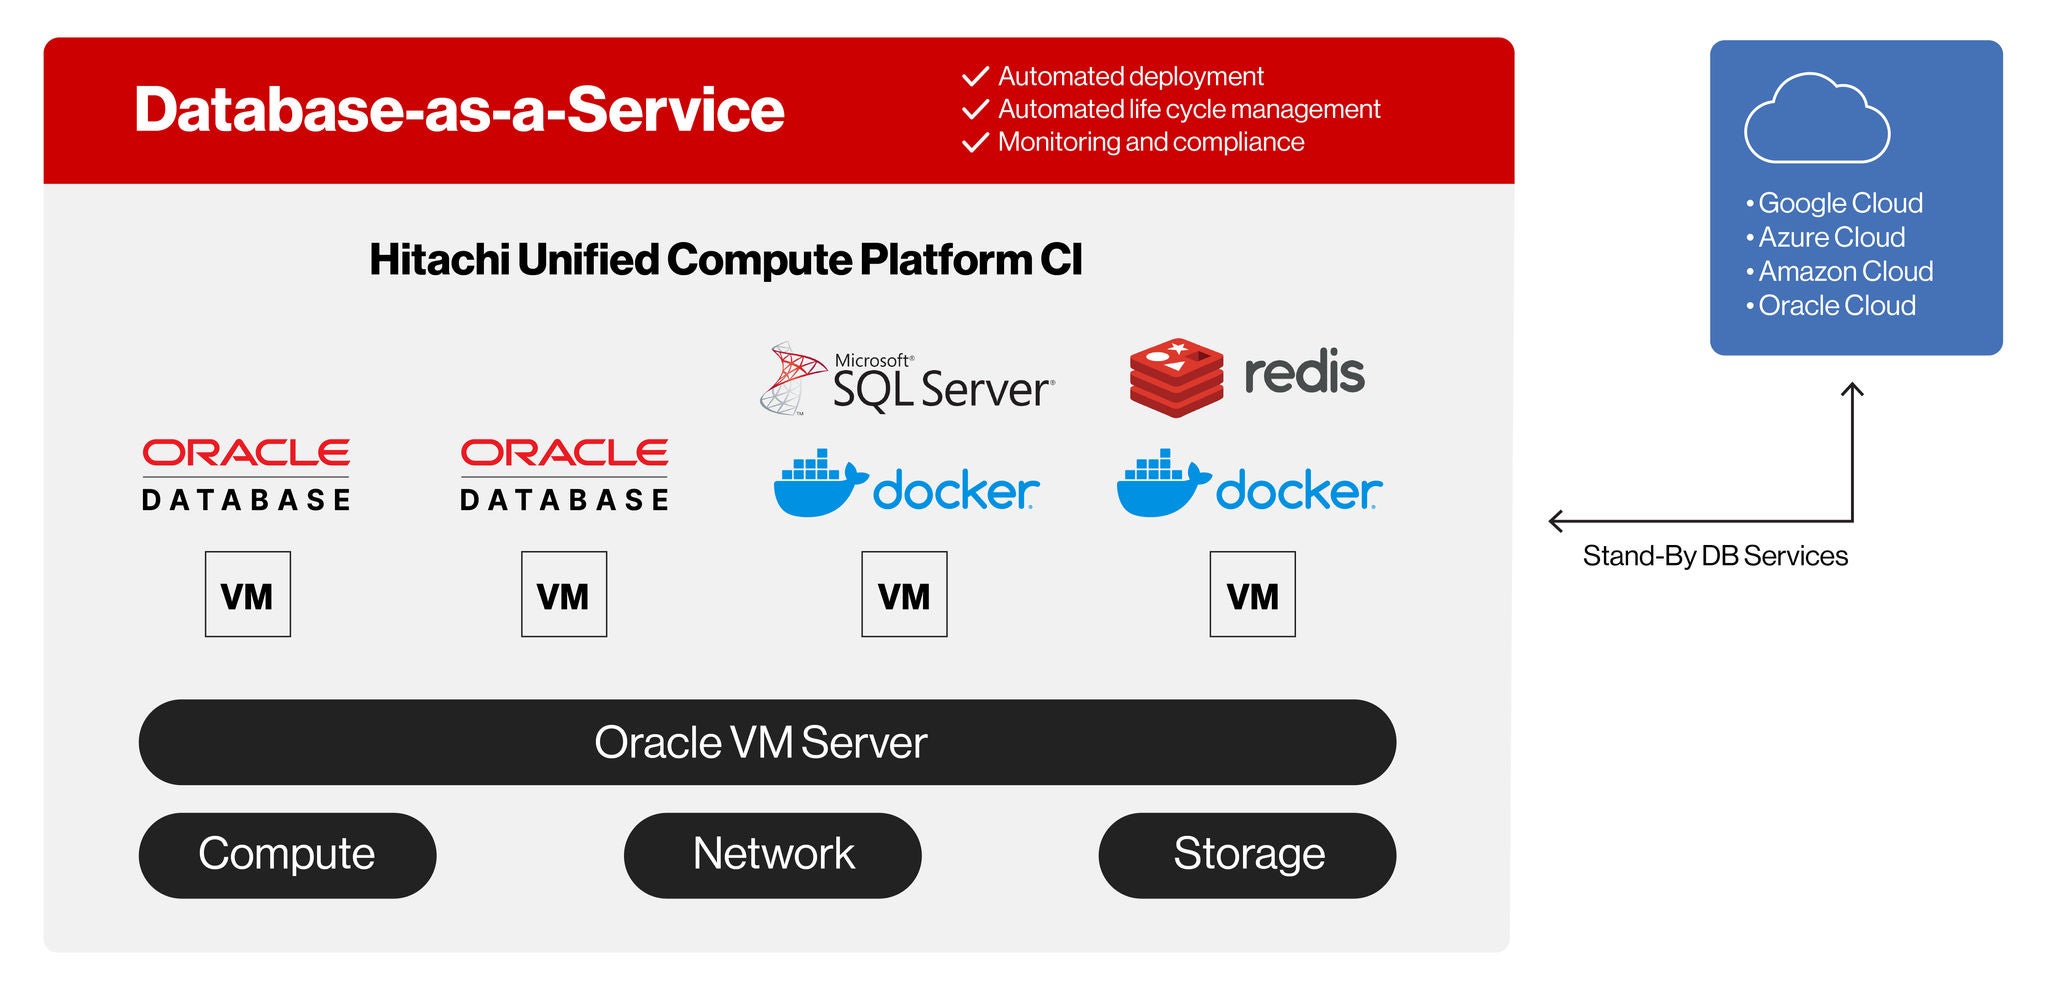 Optimize performance and significantly reduce TCO with DBaaS and Hitachi Unified Compute Platform. Our pre-validated, turnkey, multicloud solution is built to power critical, low latency workloads, delivering superior experiences and competitive advantage.